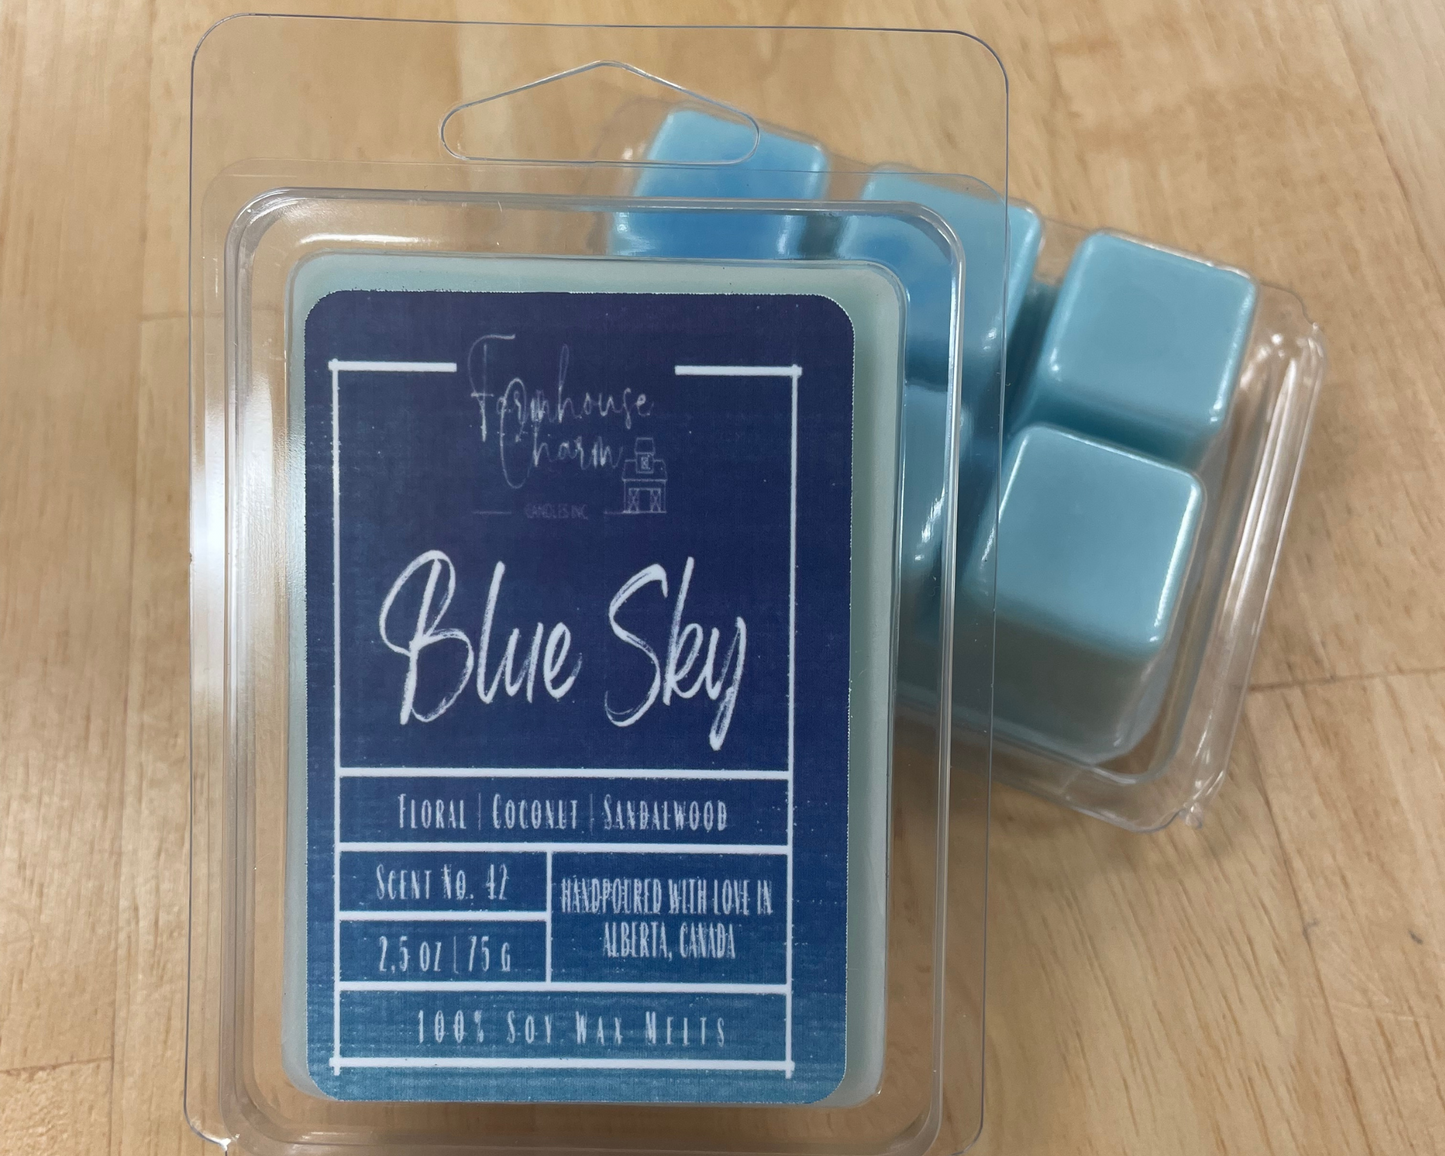 Blue Sky Soy Wax Melts- Farmhouse Charm has a delightful blend of floral, coconut, and sandalwood scents that will fill your home with a calming atmosphere. Floral notes of fresh flowers and green botanicals create a soothing and inviting atmosphere, while the coconut and sandalwood create a warm and comforting ambience. Together, these  scents combine to create an atmosphere that evoke the feeling of a bright and sunny spring day!  size: 2.5 oz. (75 g)